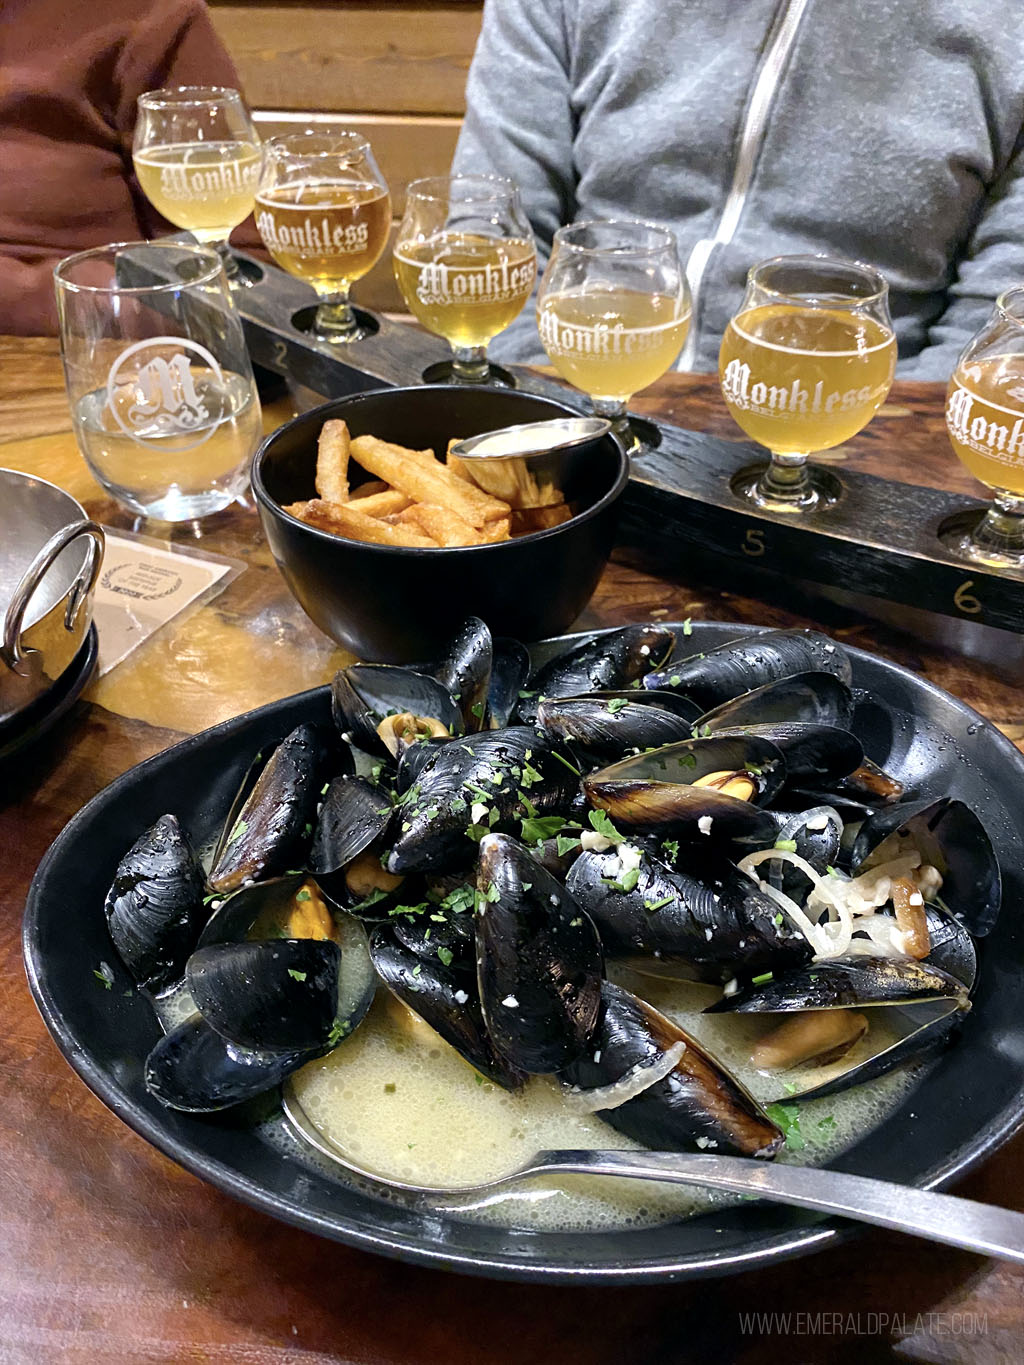 mussels, frites, and beer tasting flight from Monkless Ales in Bend, OR